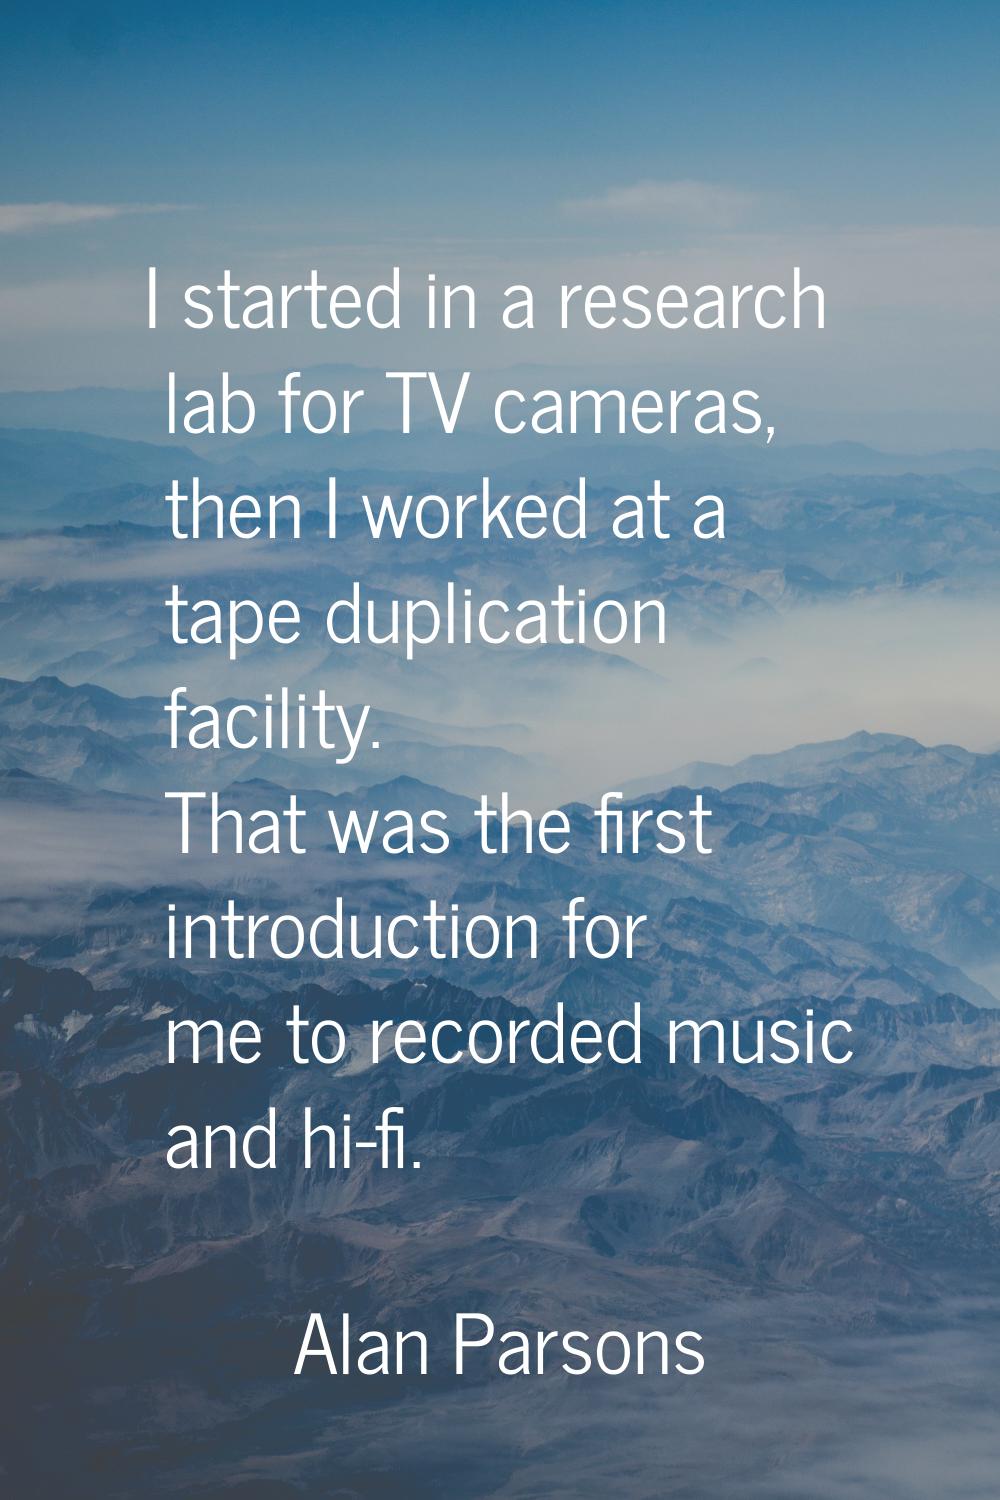 I started in a research lab for TV cameras, then I worked at a tape duplication facility. That was 